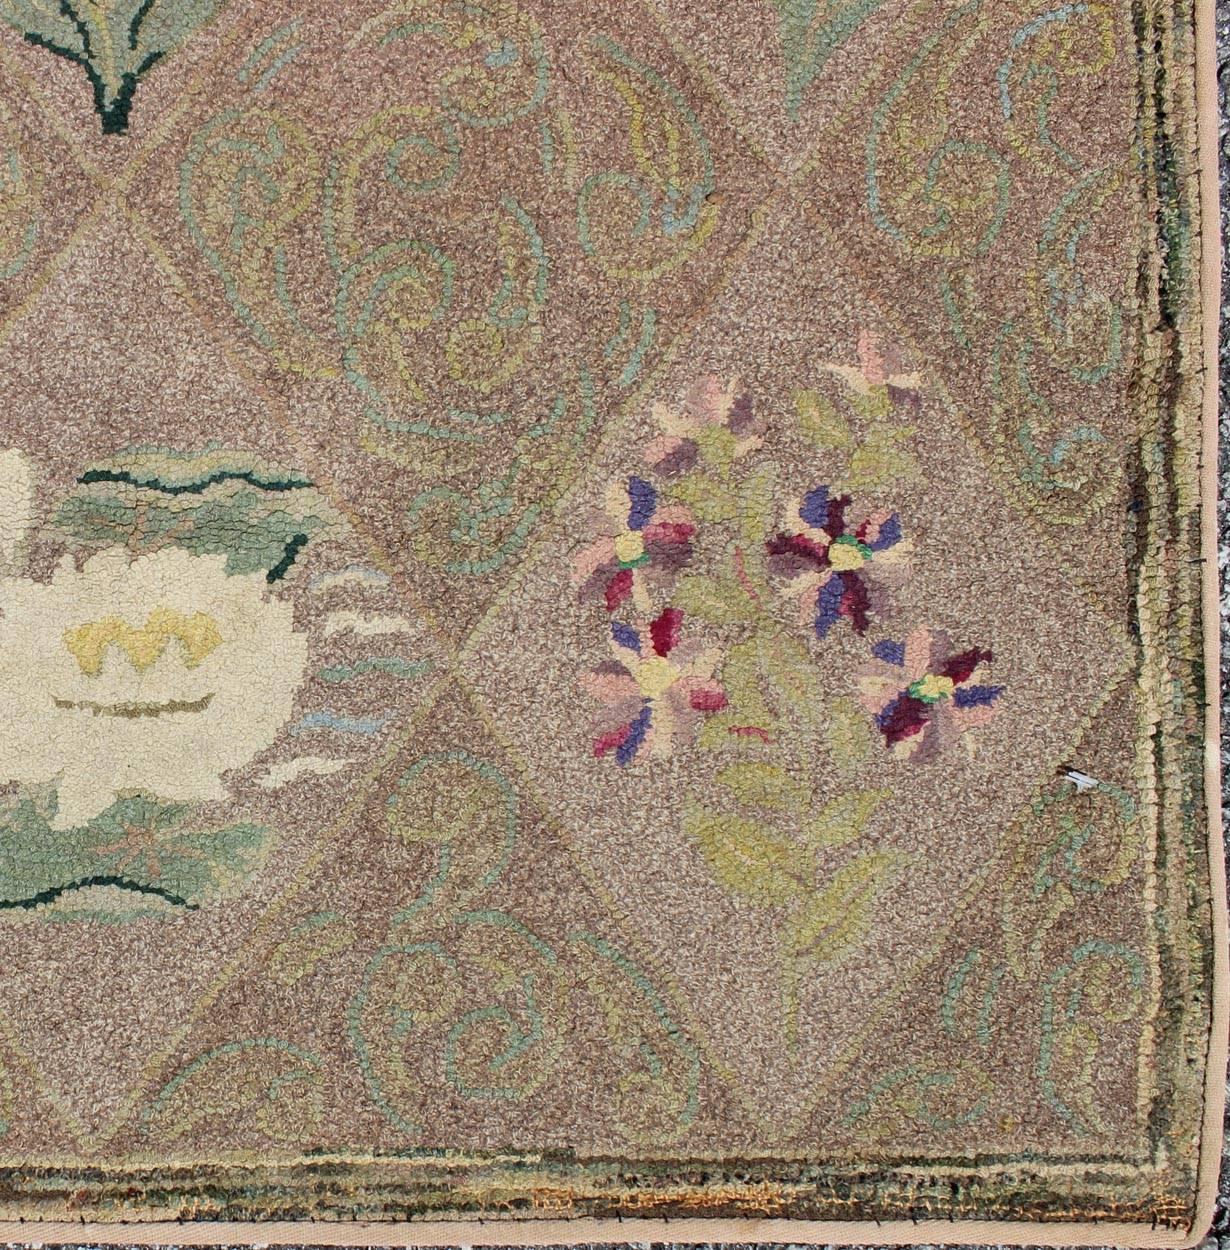 Floral bouquet design antique American hooked rug, rug ebd-1003, country of origin / type: United States / Hooked, circa 1920

Ingenious in style, color and composition, the features in this spectacular, antique American Hooked rug create an